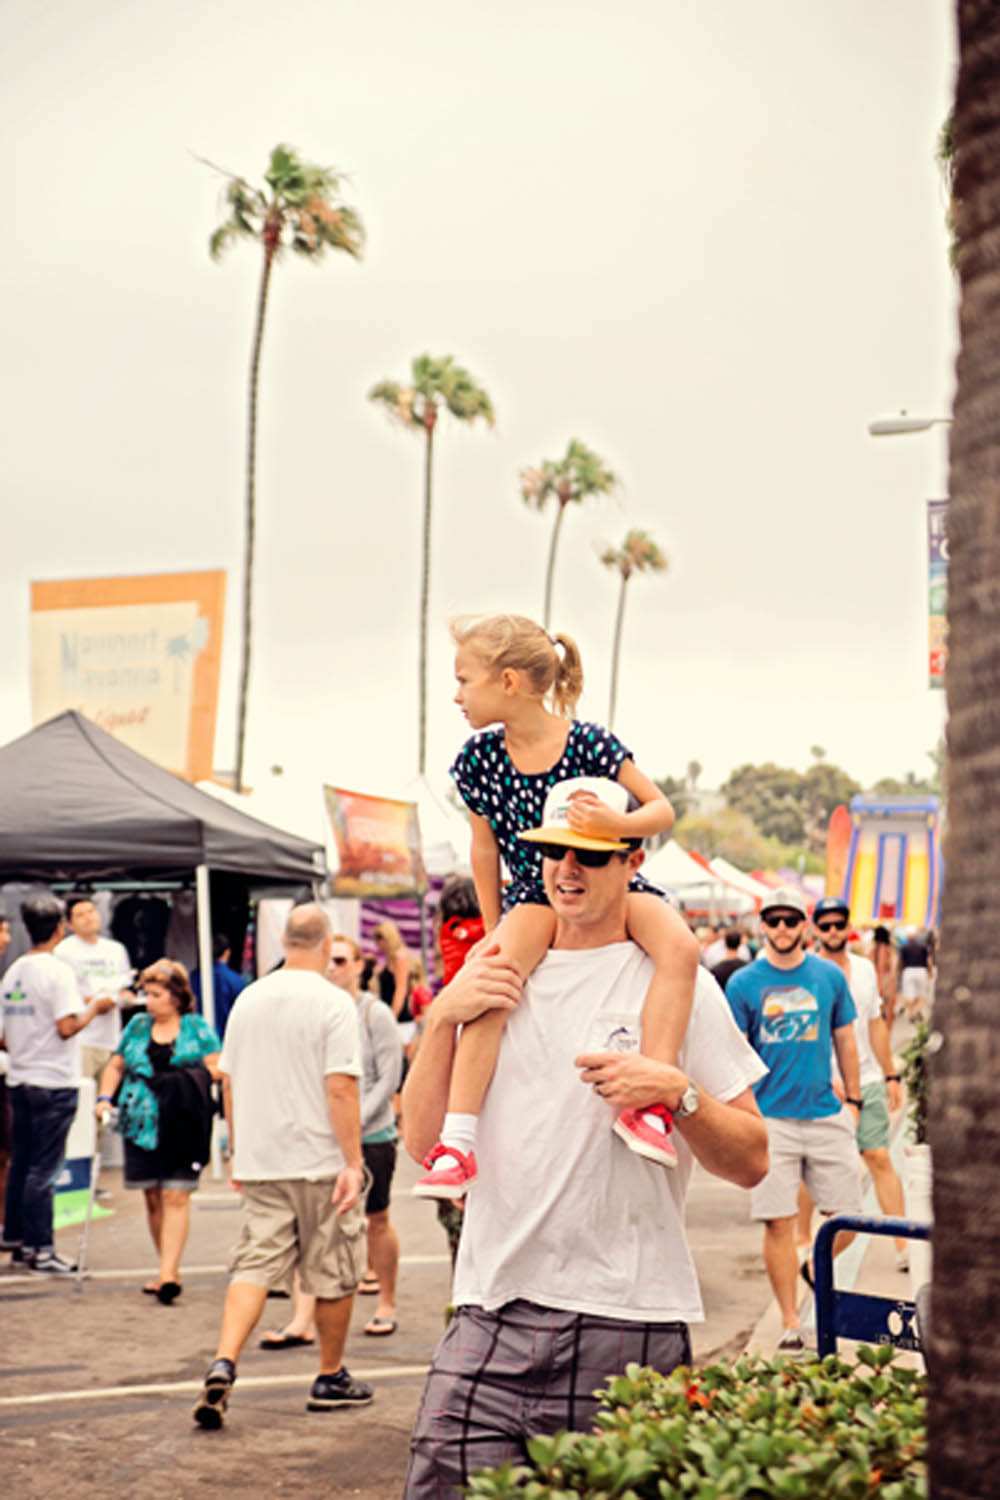 36th Annual Ocean Beach Street Fair and Chili Cook-Off - Official event photos by Troy Orem Photography